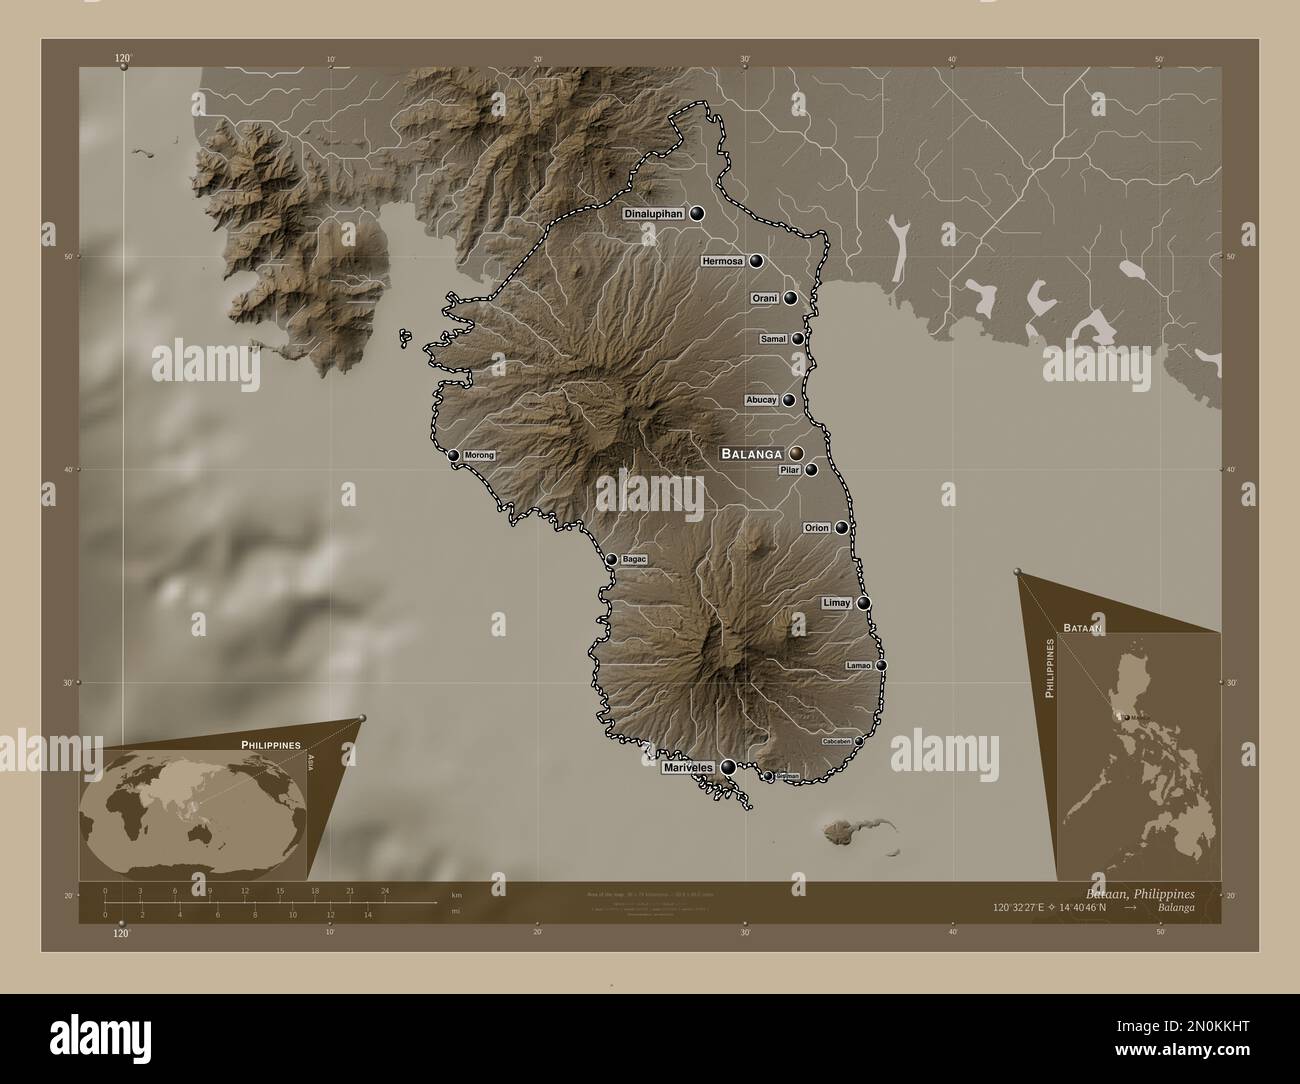 Bataan, province of Philippines. Elevation map colored in sepia tones with lakes and rivers. Locations and names of major cities of the region. Corner Stock Photo